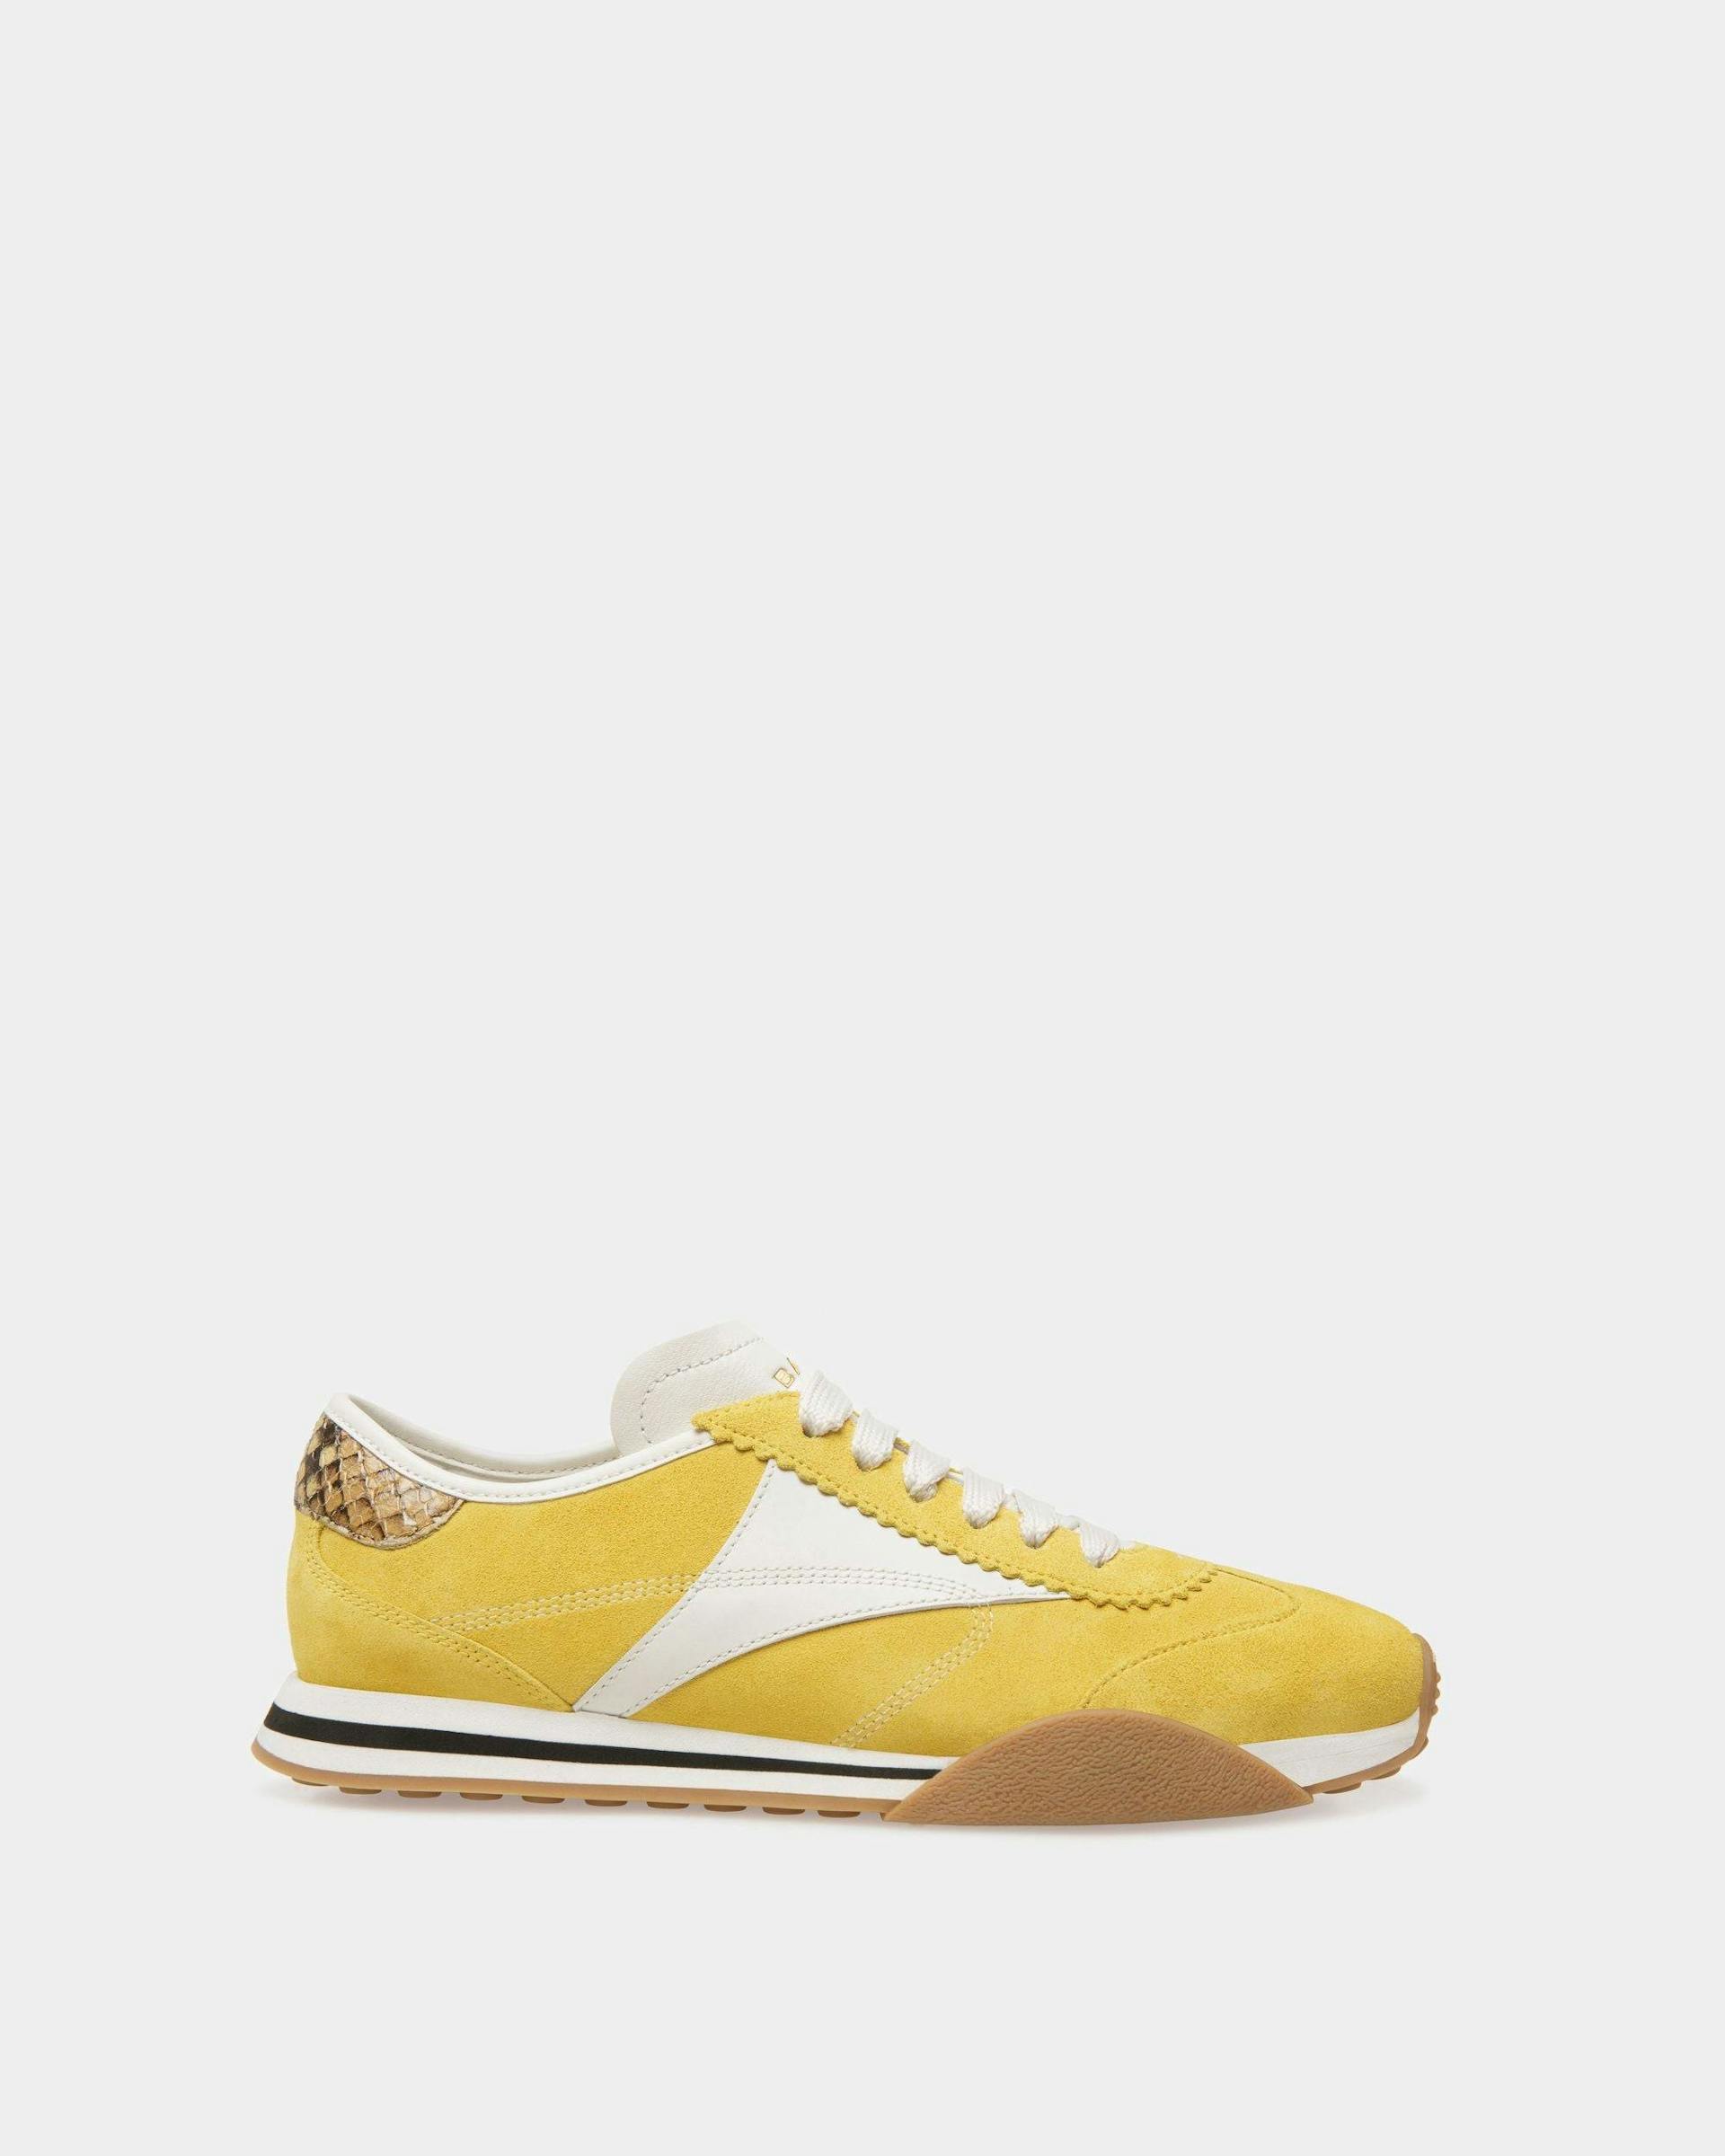 Sussex Sneakers In Yellow And White Leather - Women's - Bally - 01